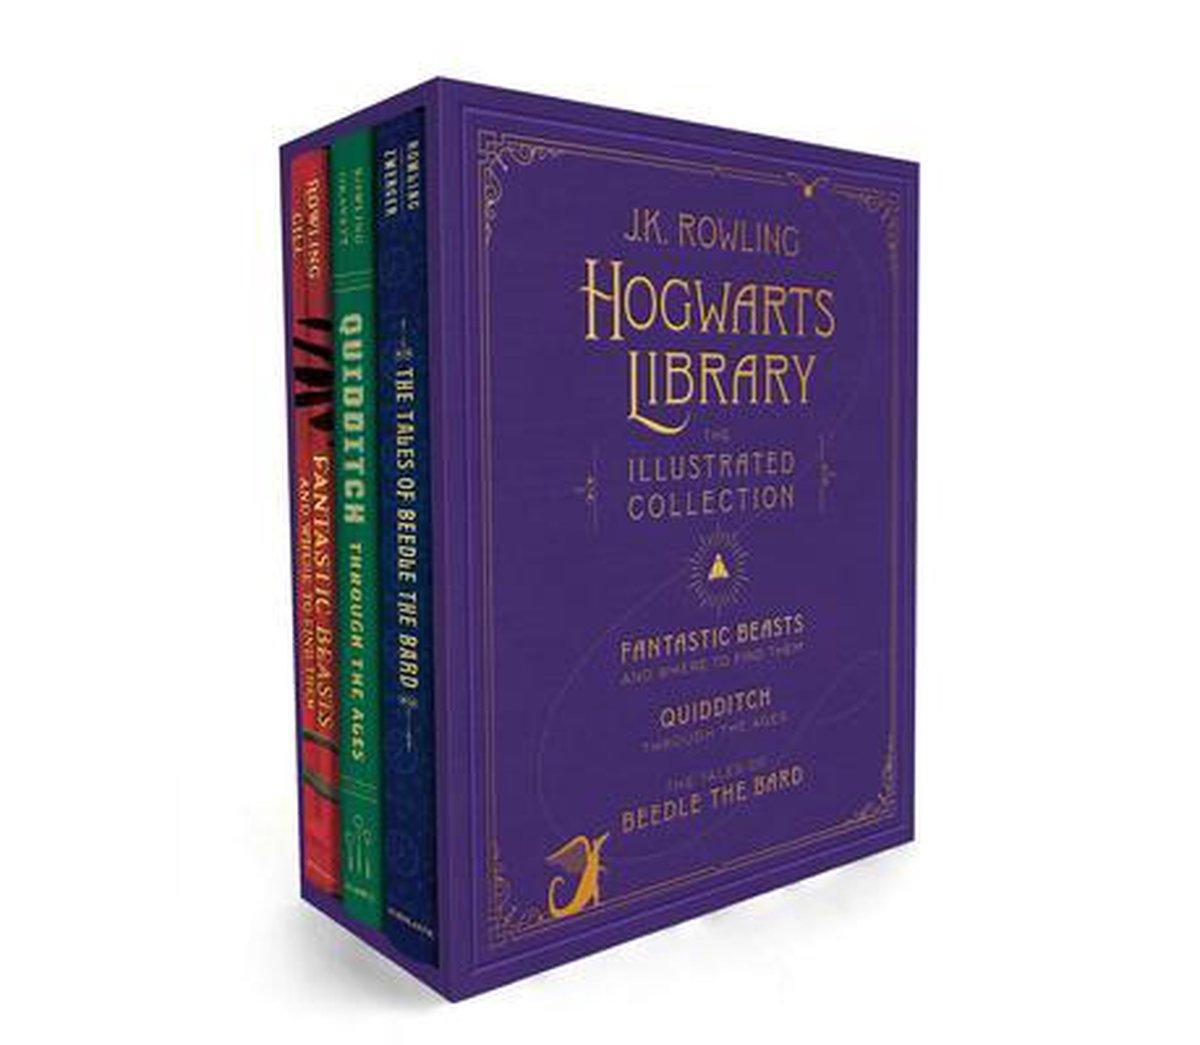 Hogwarts Library The Illustrated Collection Harry Potter - J.K. Rowling